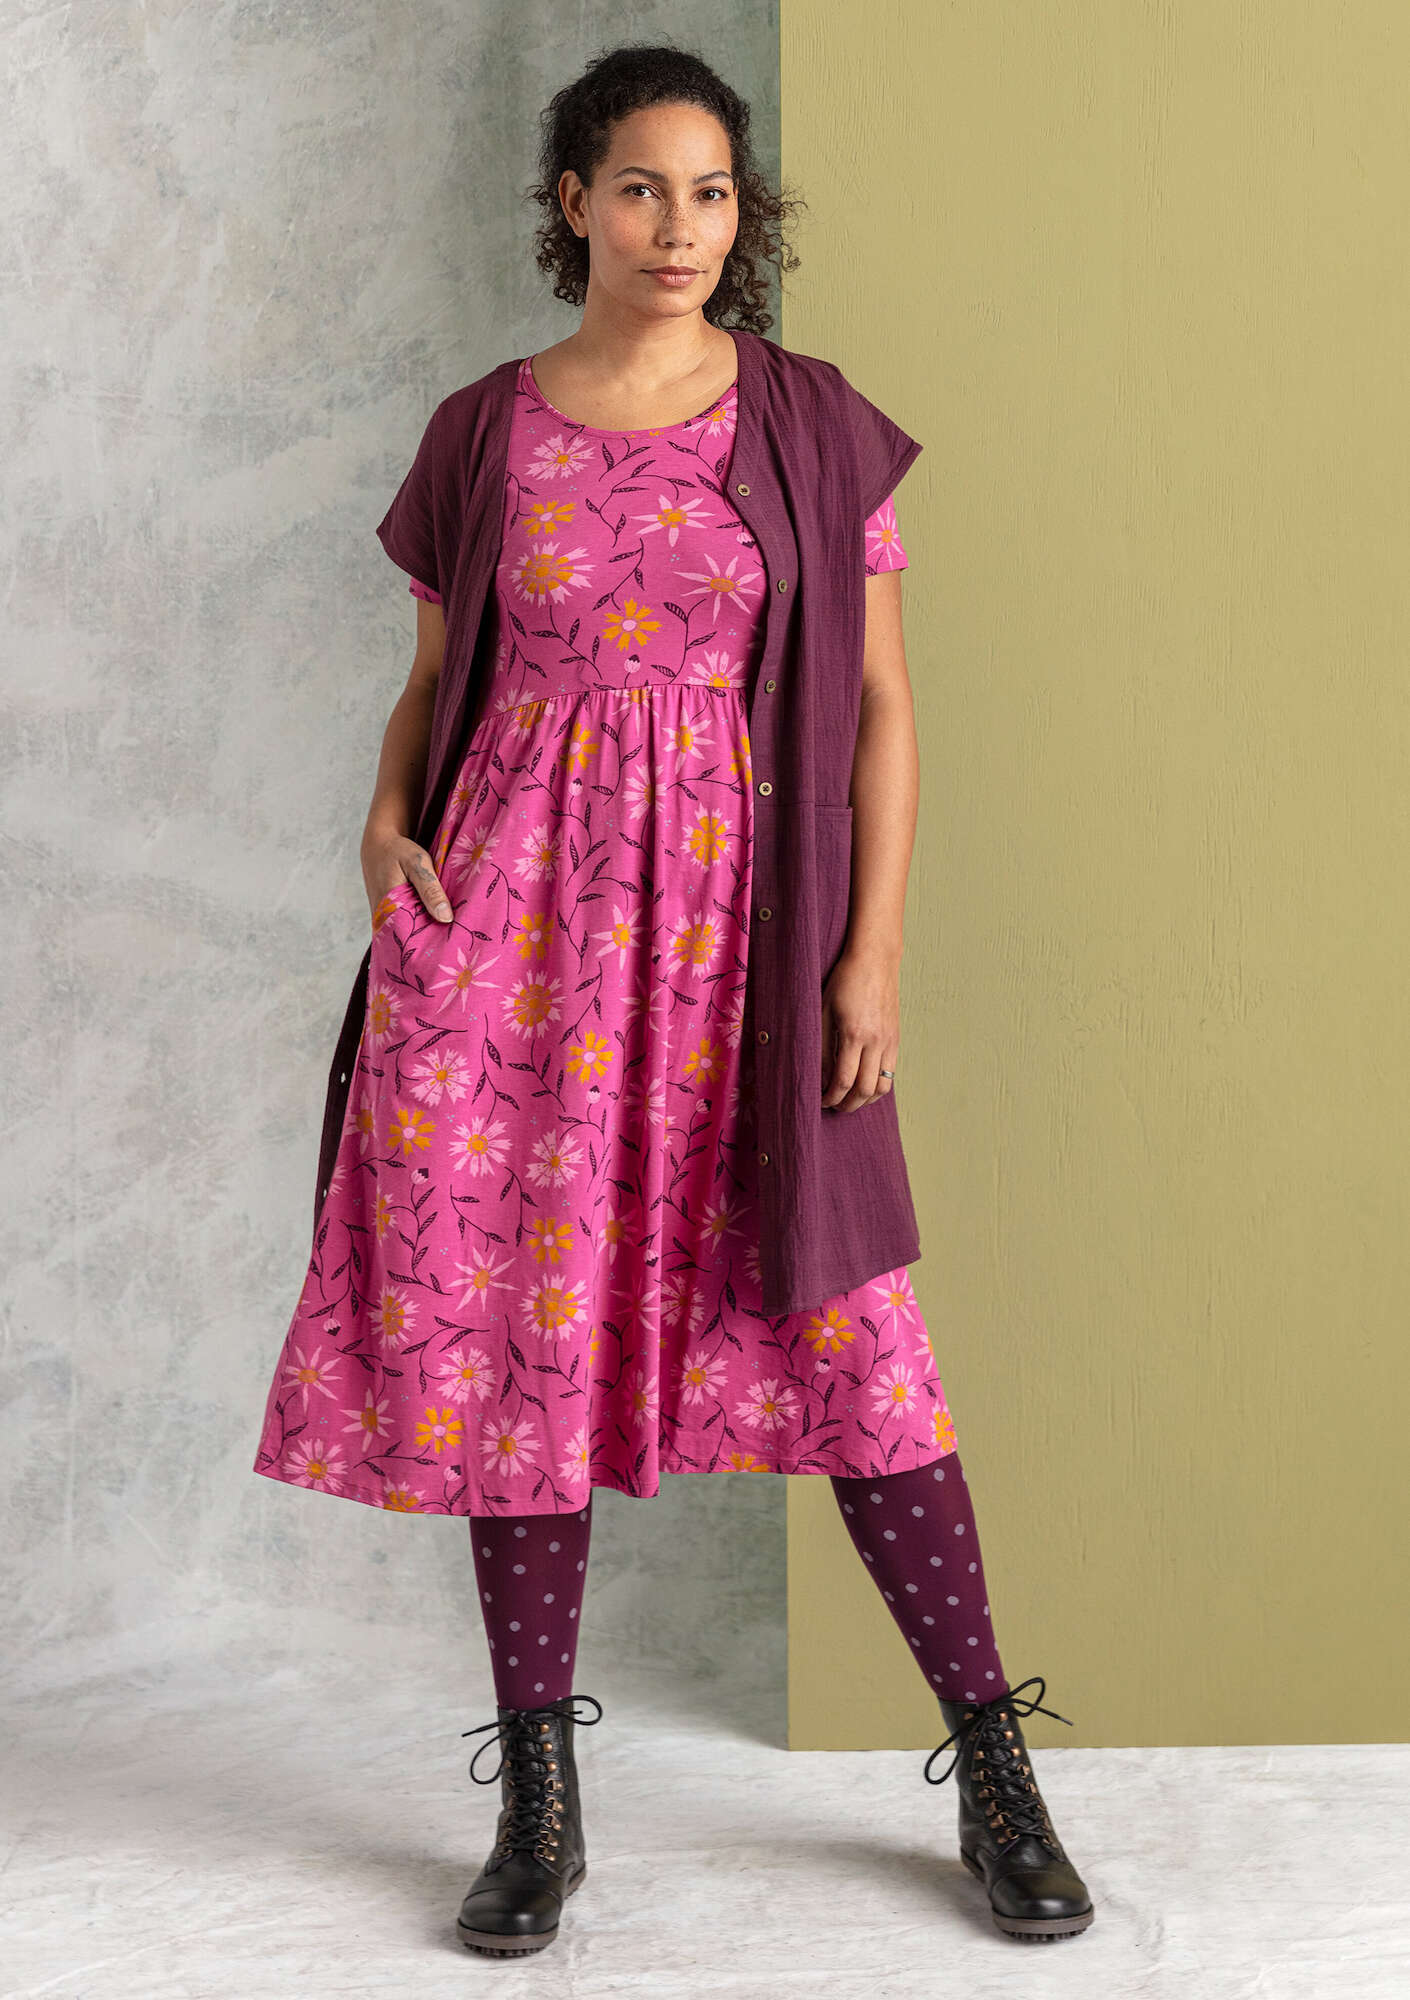 “Isolde” jersey dress in organic cotton/modal pink orchid/patterned